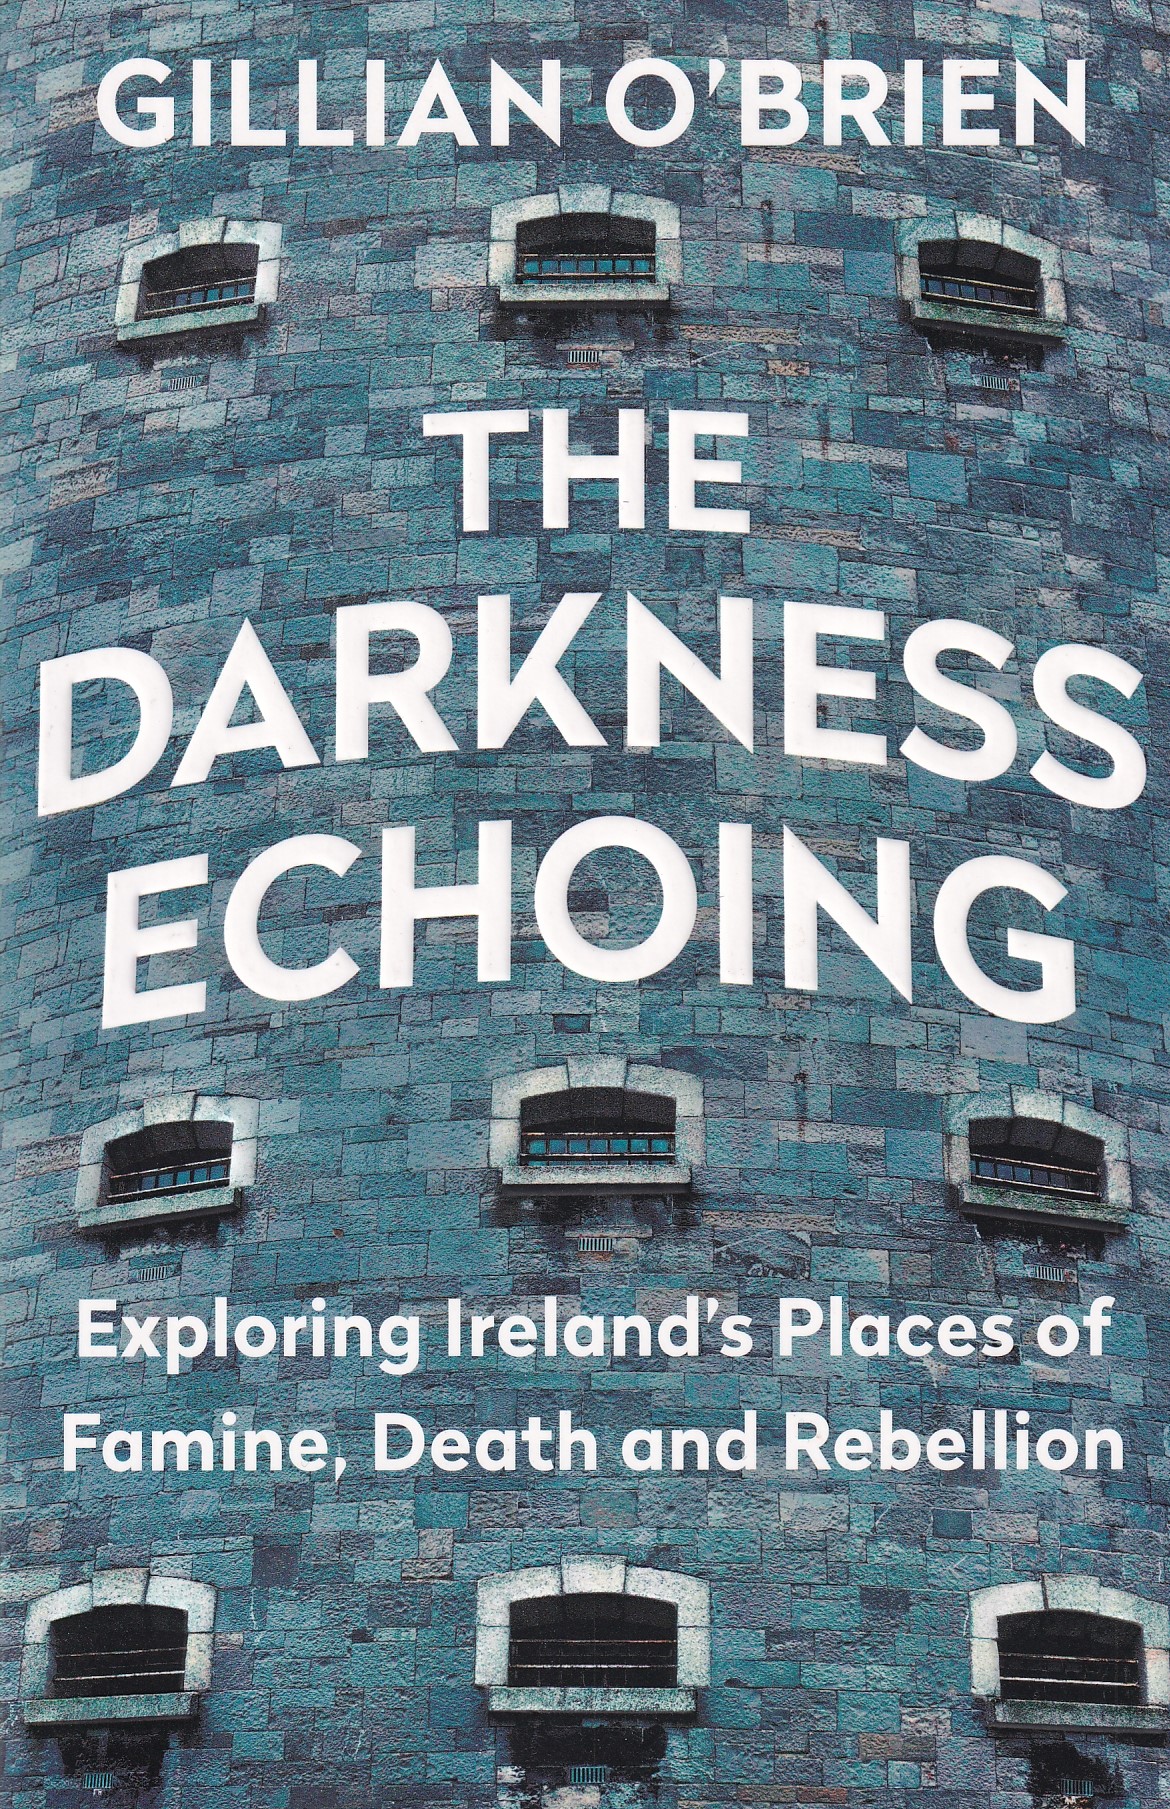 The Darkness Echoing: Exploring Ireland’s Places of Famine, Death and Rebellion [Signed] | Gillian O'Brien | Charlie Byrne's